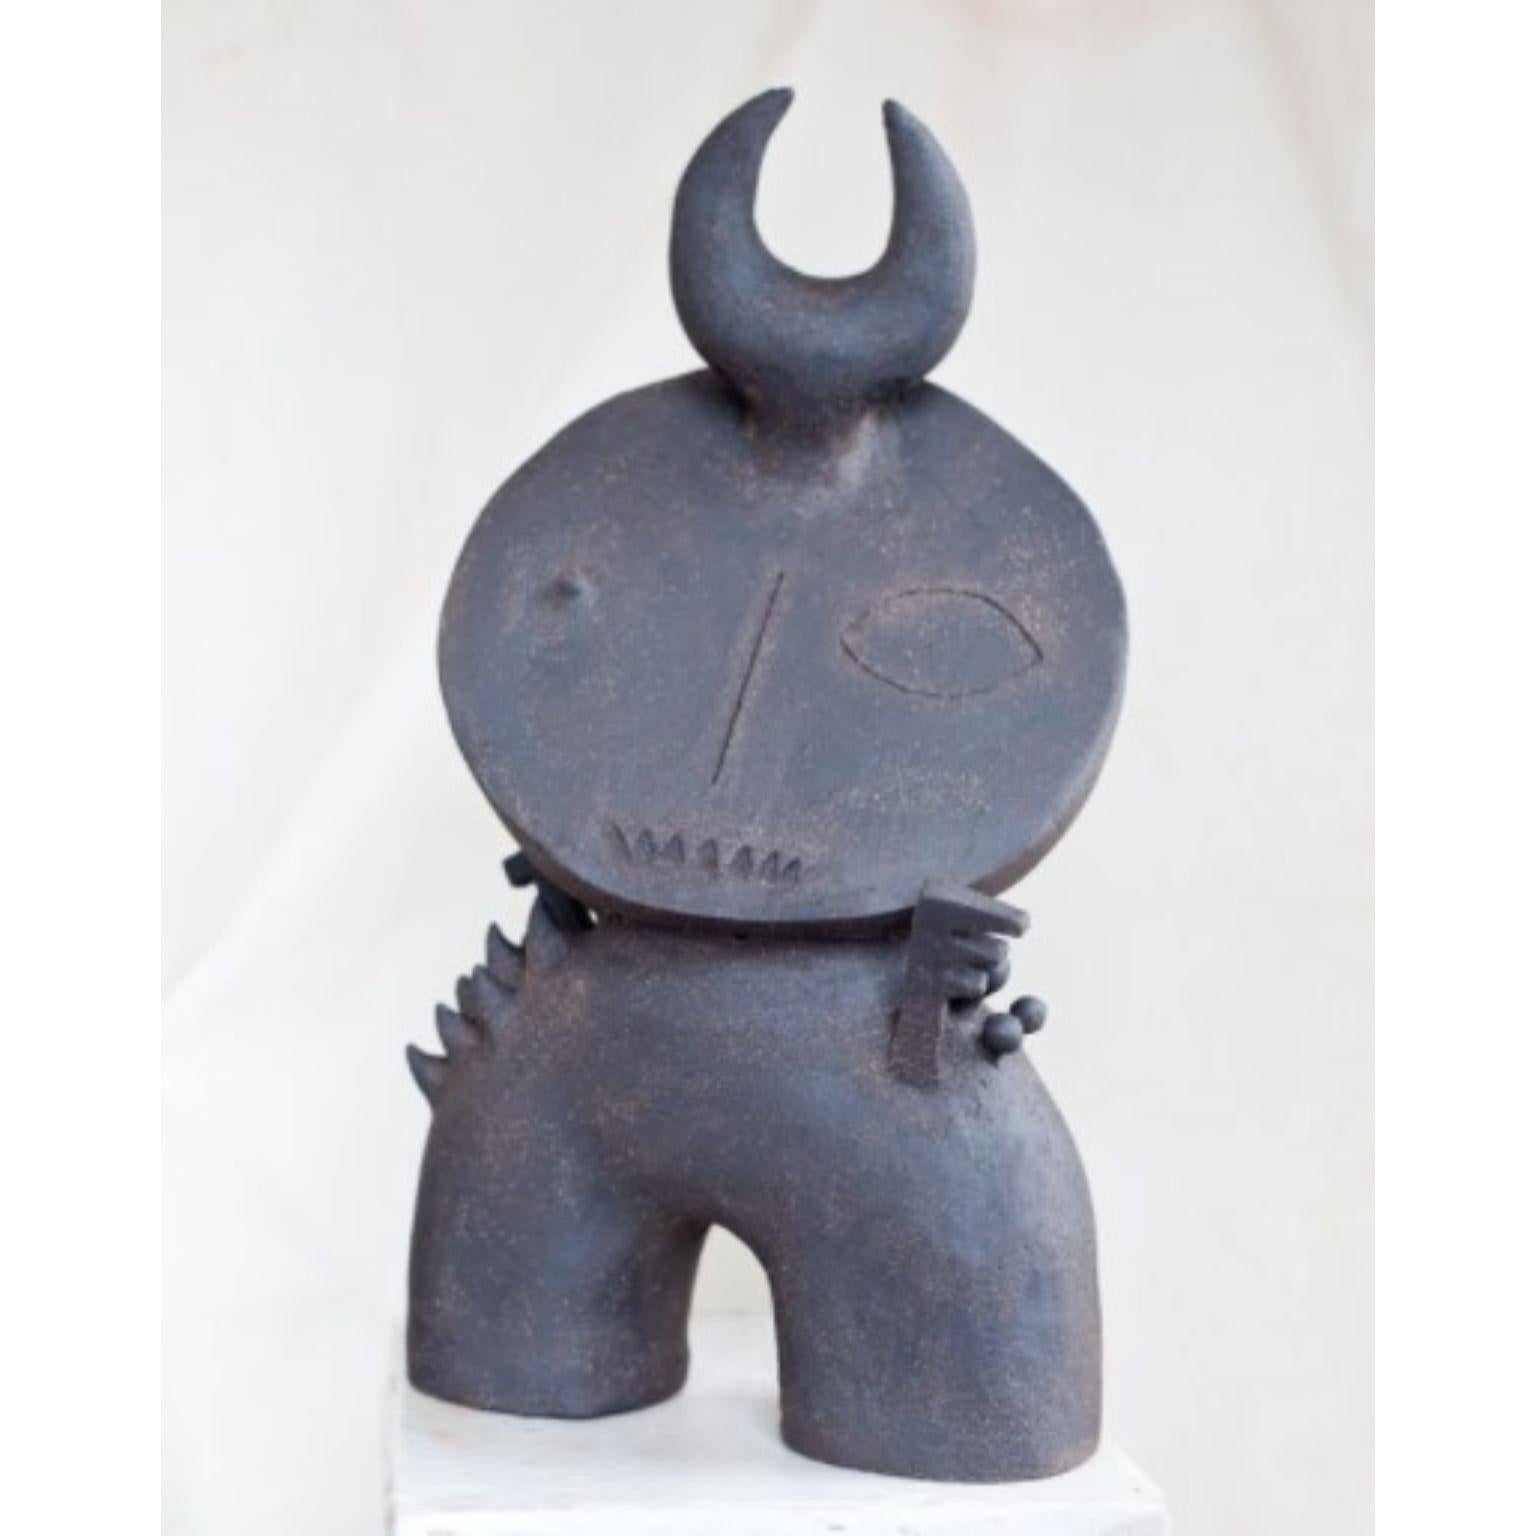 Satori 12 sculpture by Noe Kuremoto
Materials: Earthenware sculpture
Dimensions: D 22 x W 29 x H 52 cm 

When Japanese Mountain Gods appear as children, they are known as Satori. Satori can read your mind. They can speak your thoughts faster than